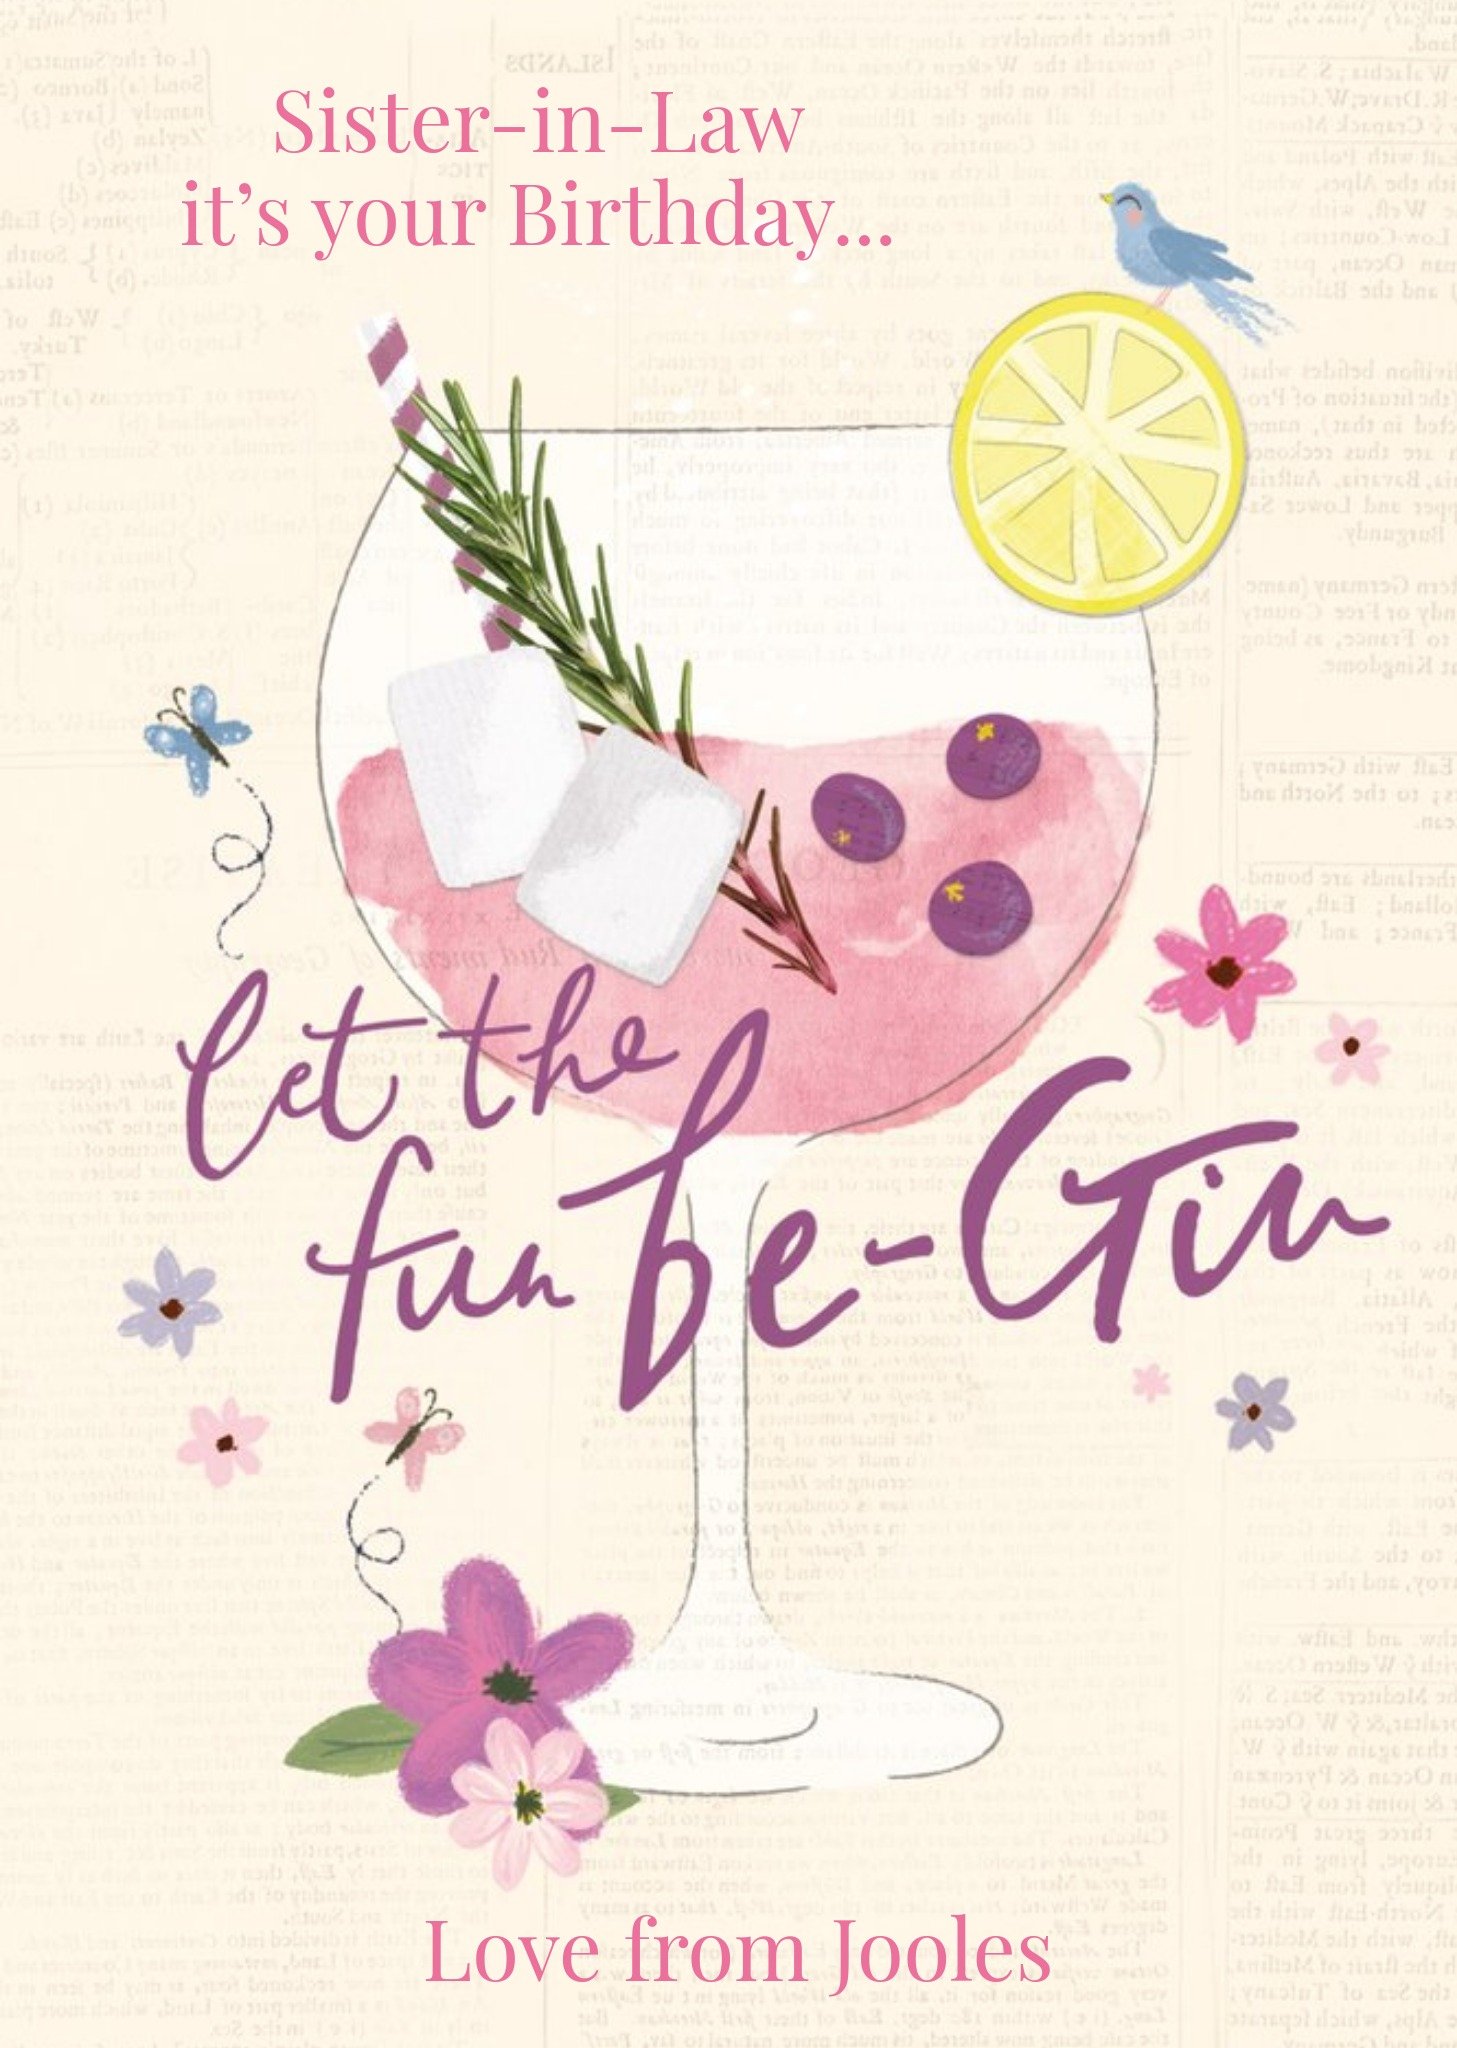 Moonpig Illustration Of A Glass Of Blueberry Rosemary Gin Sister-In-Law Birthday Card Ecard